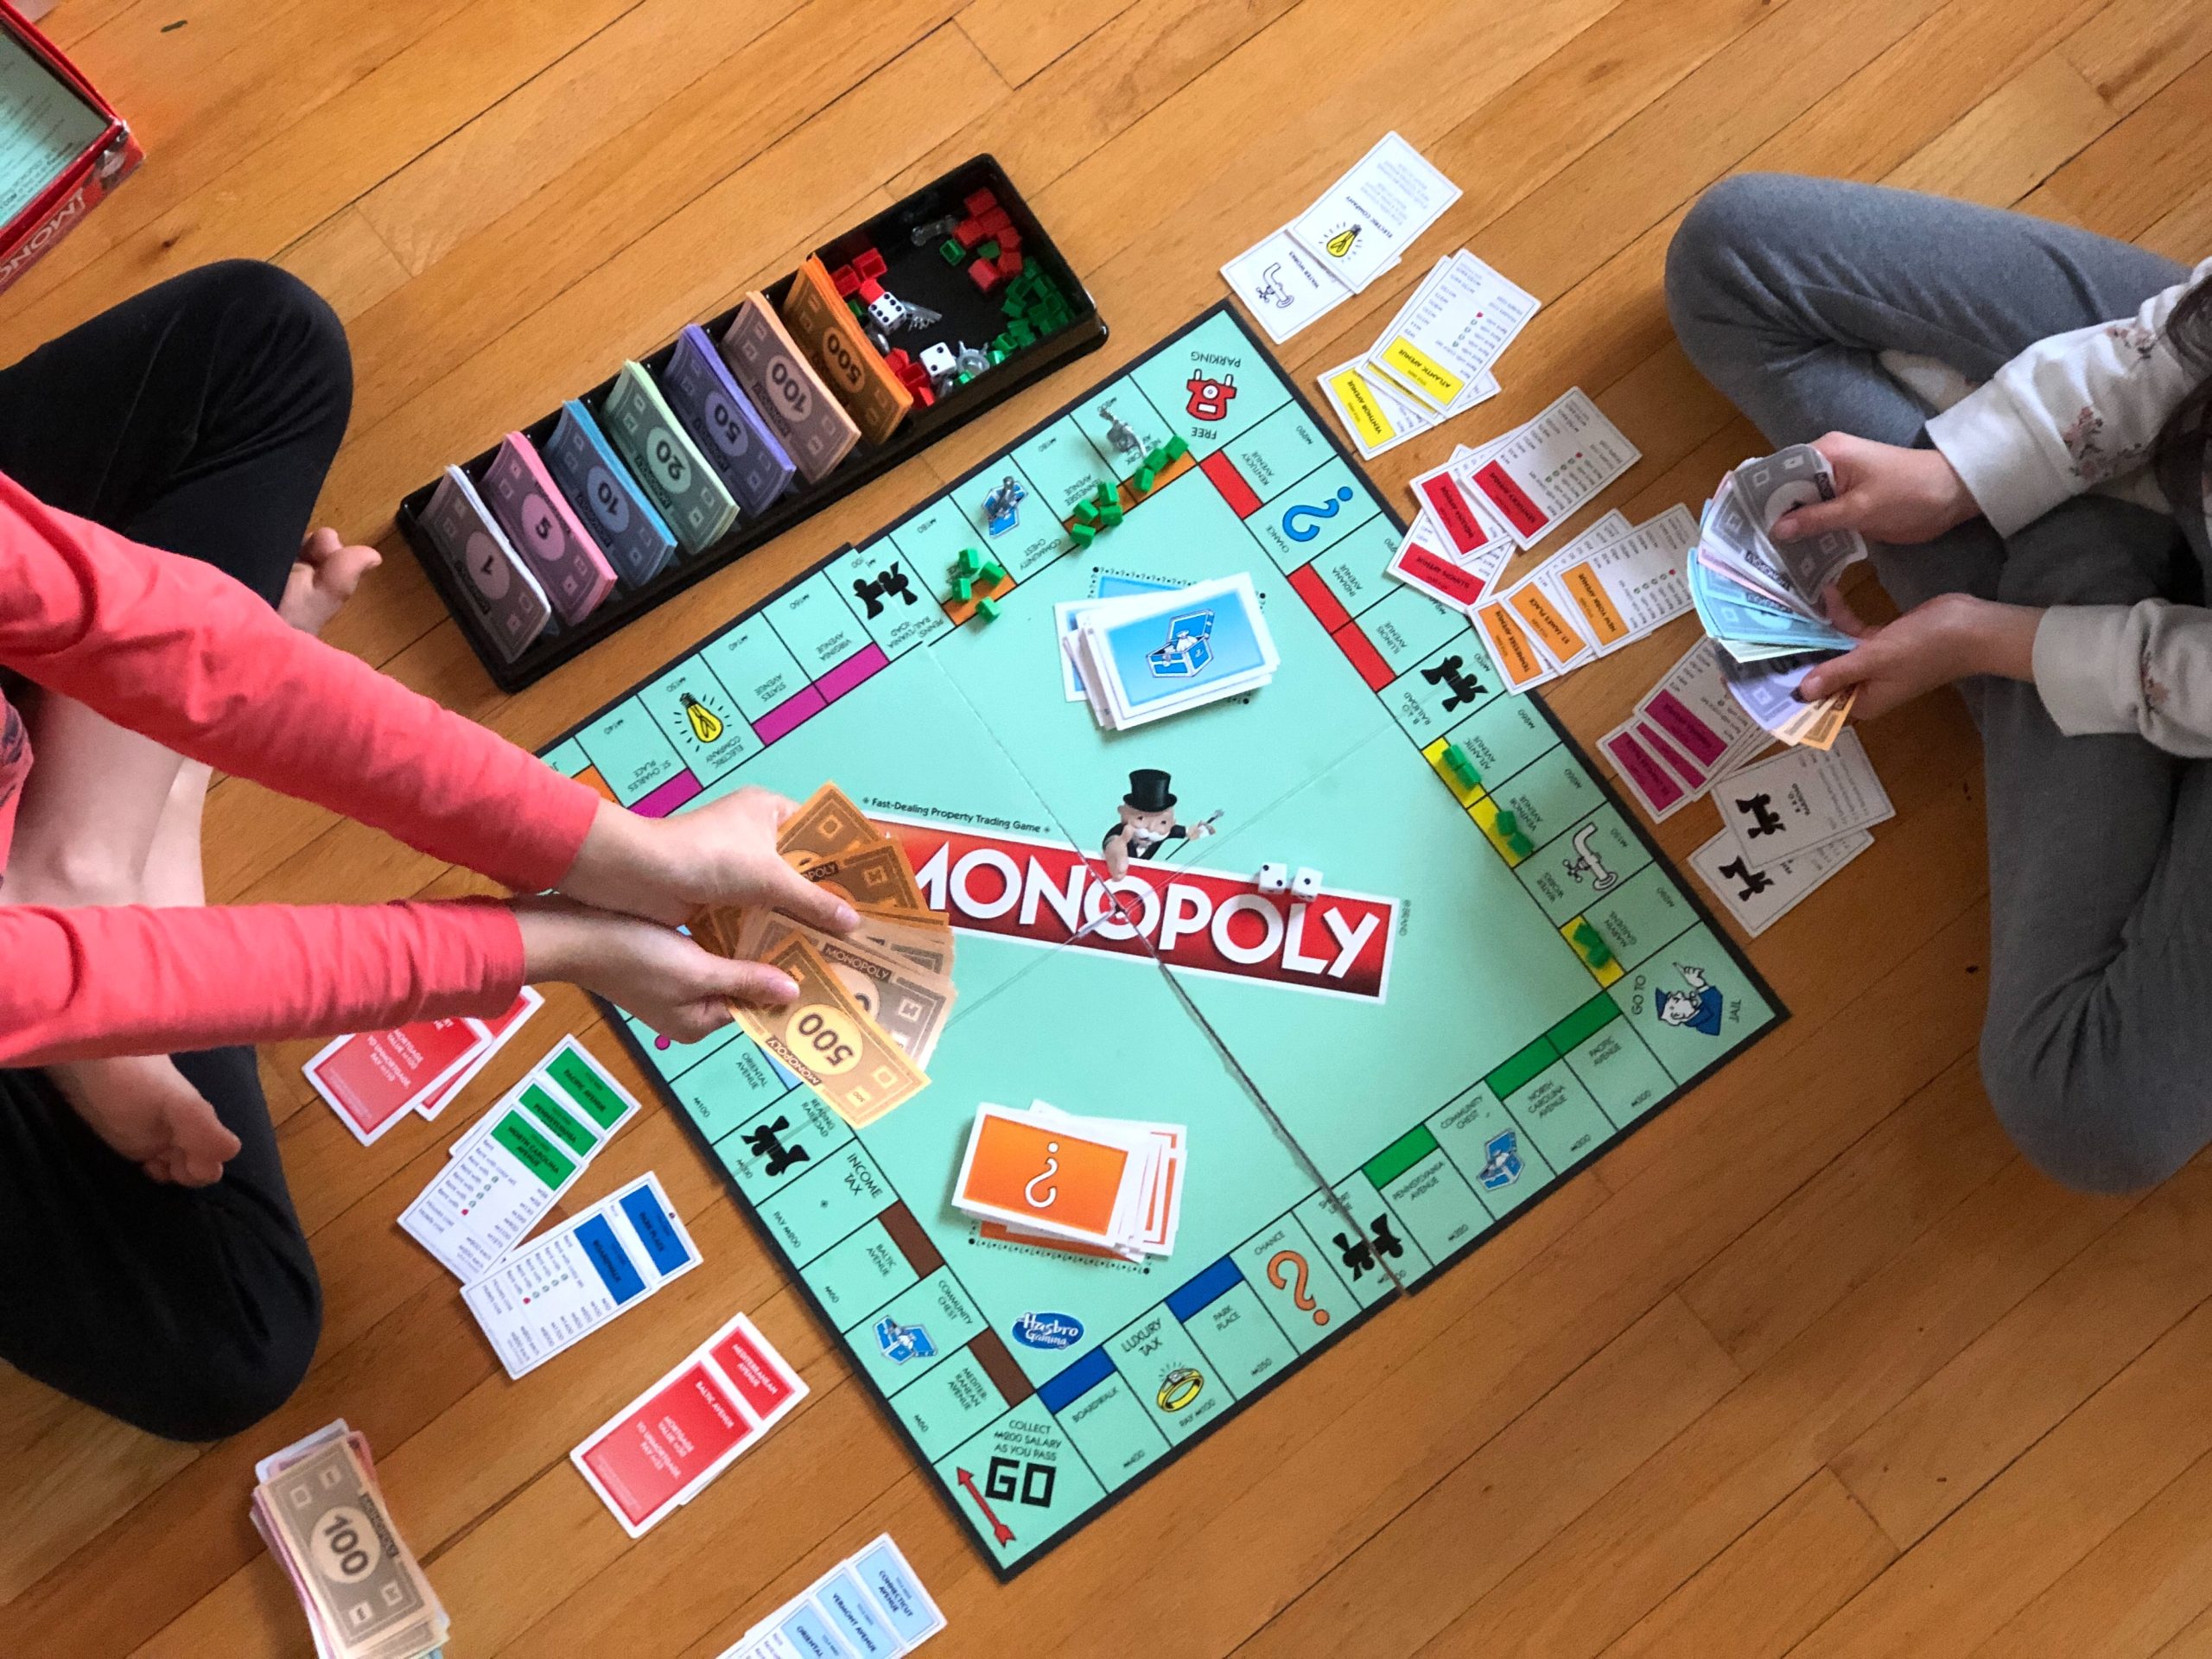 monopoly playing